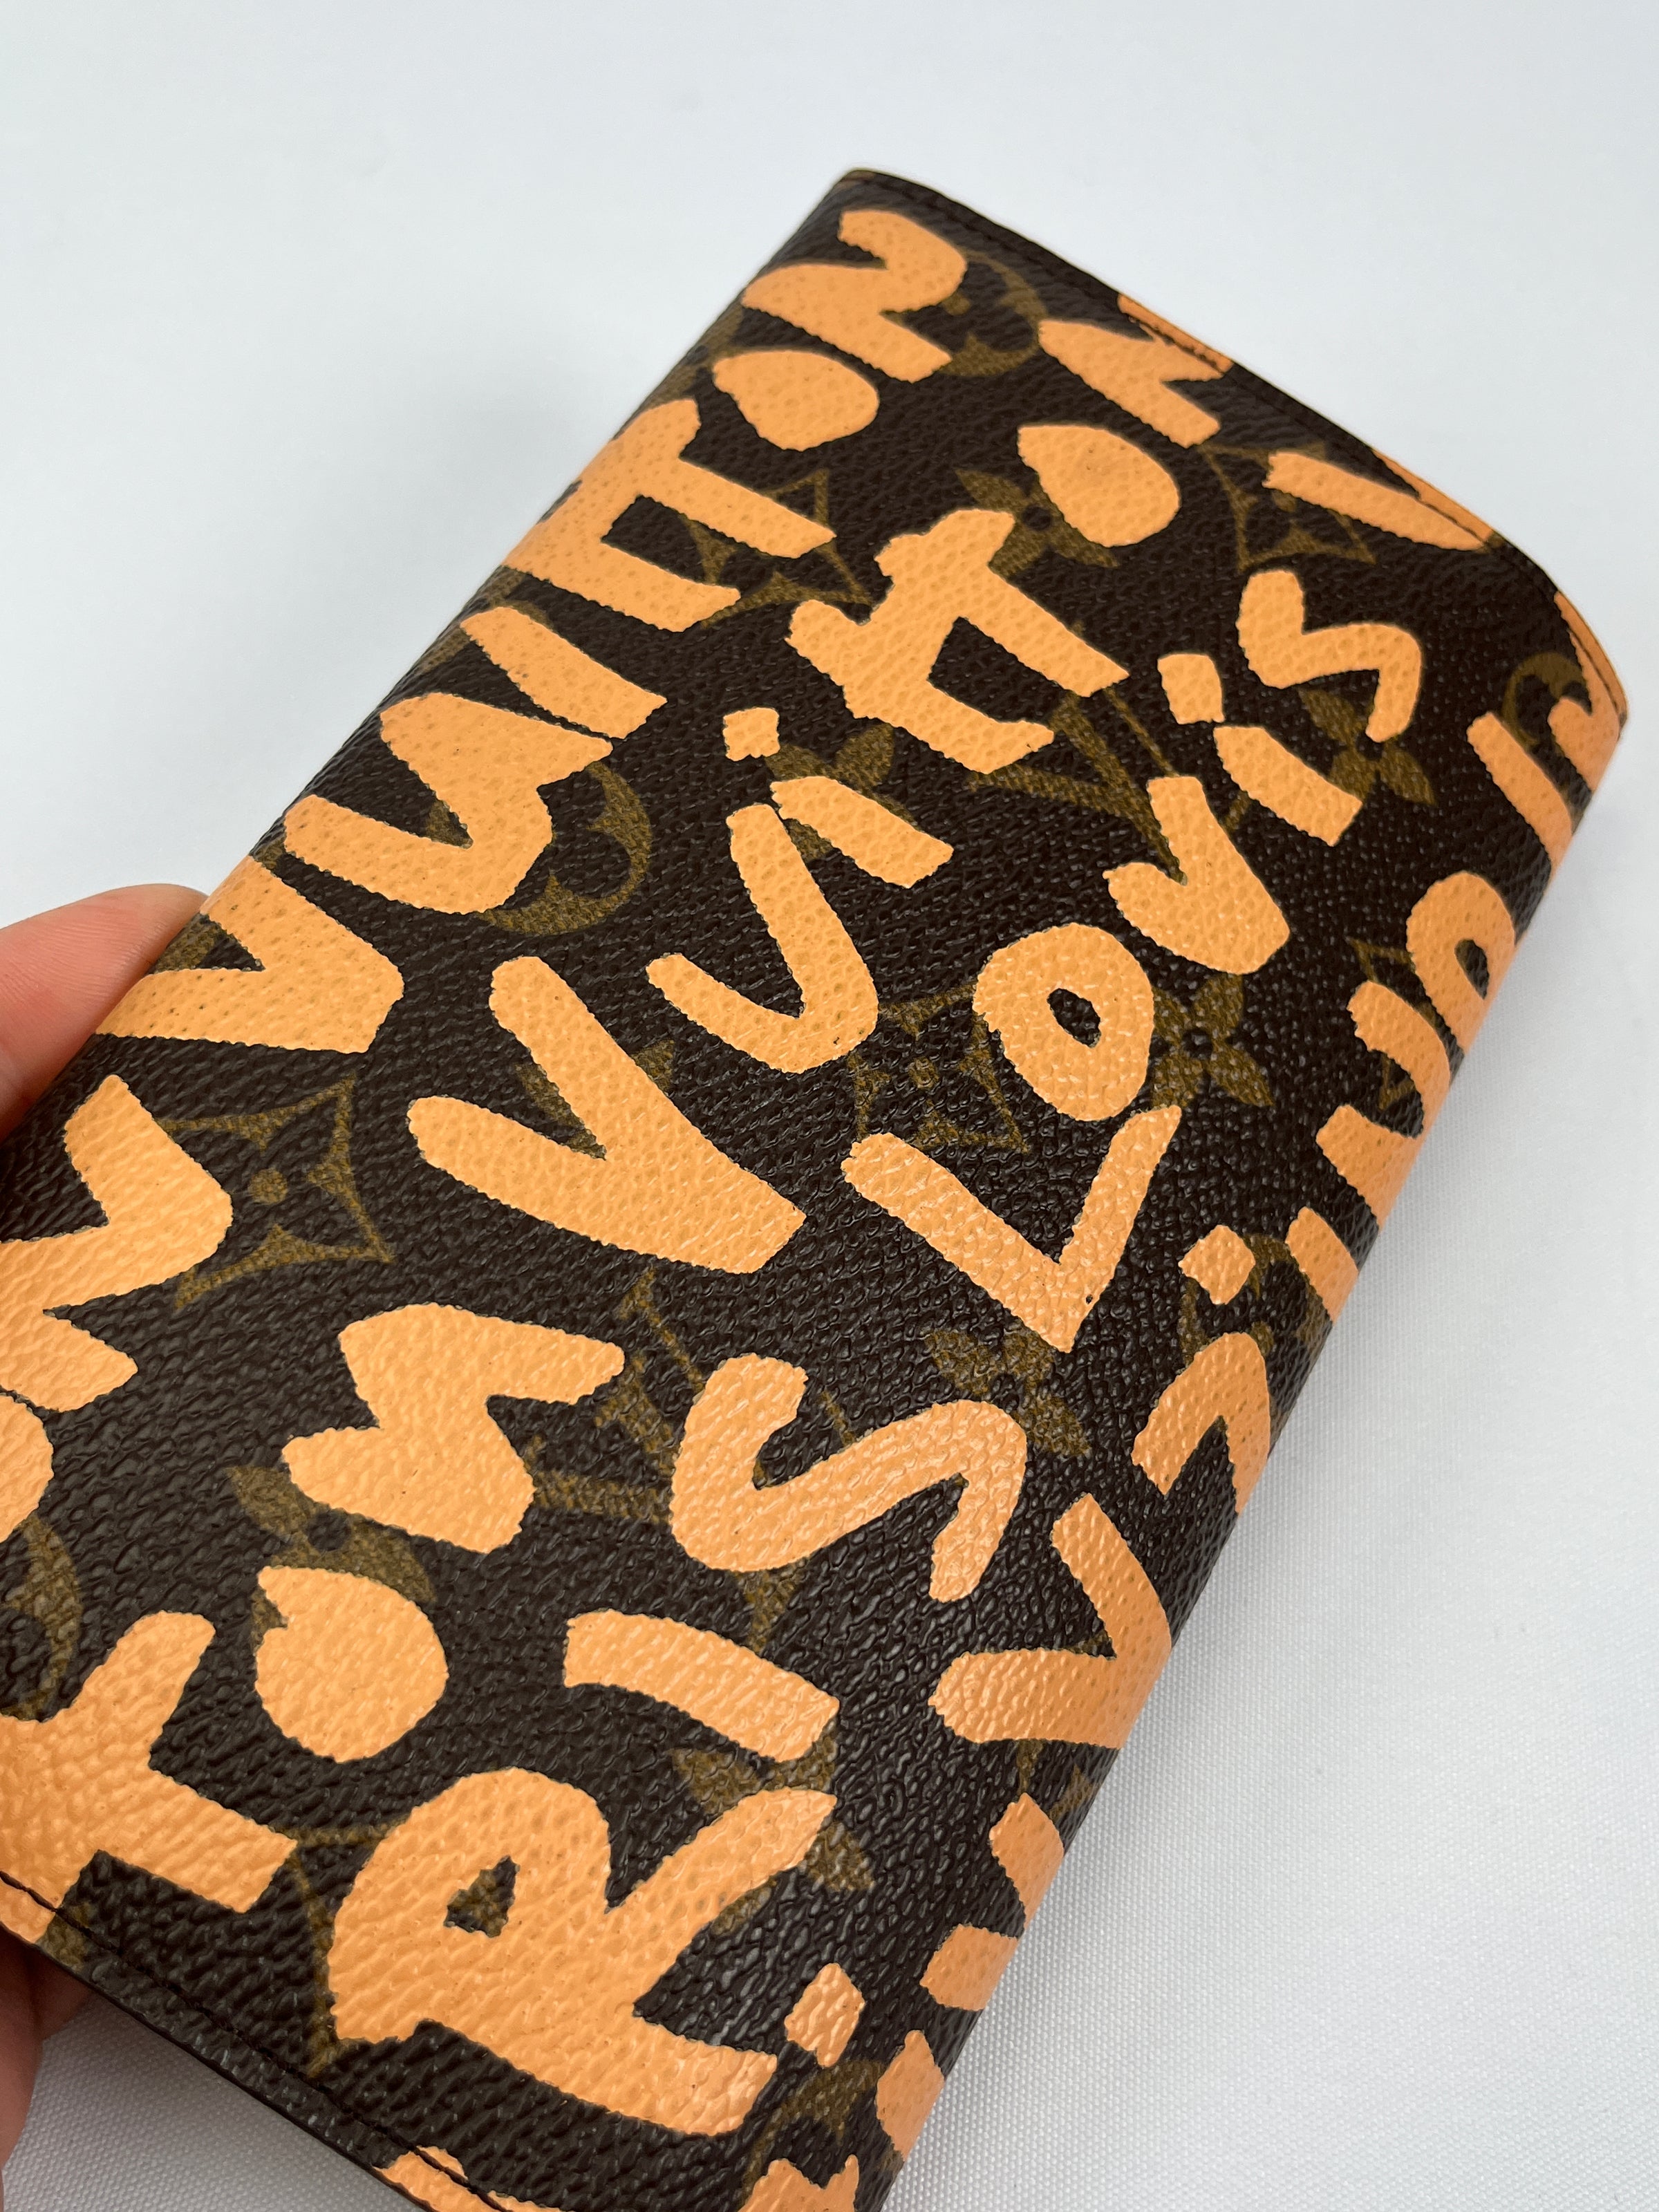 LV Graffiti Wallet By Stephen Sprouse Edition for Sale in Overland